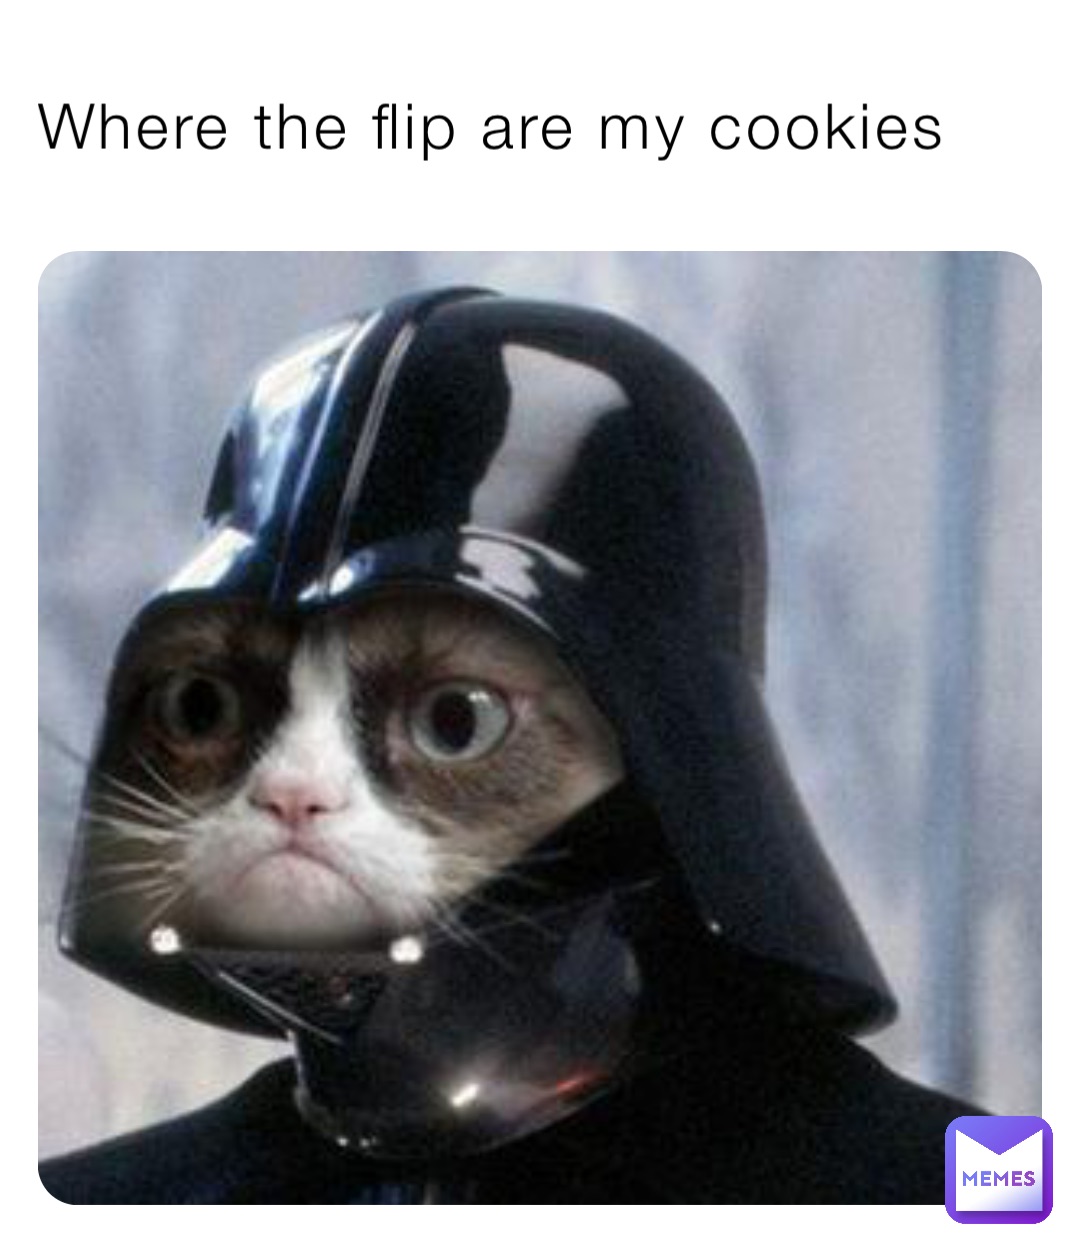 Where the flip are my cookies